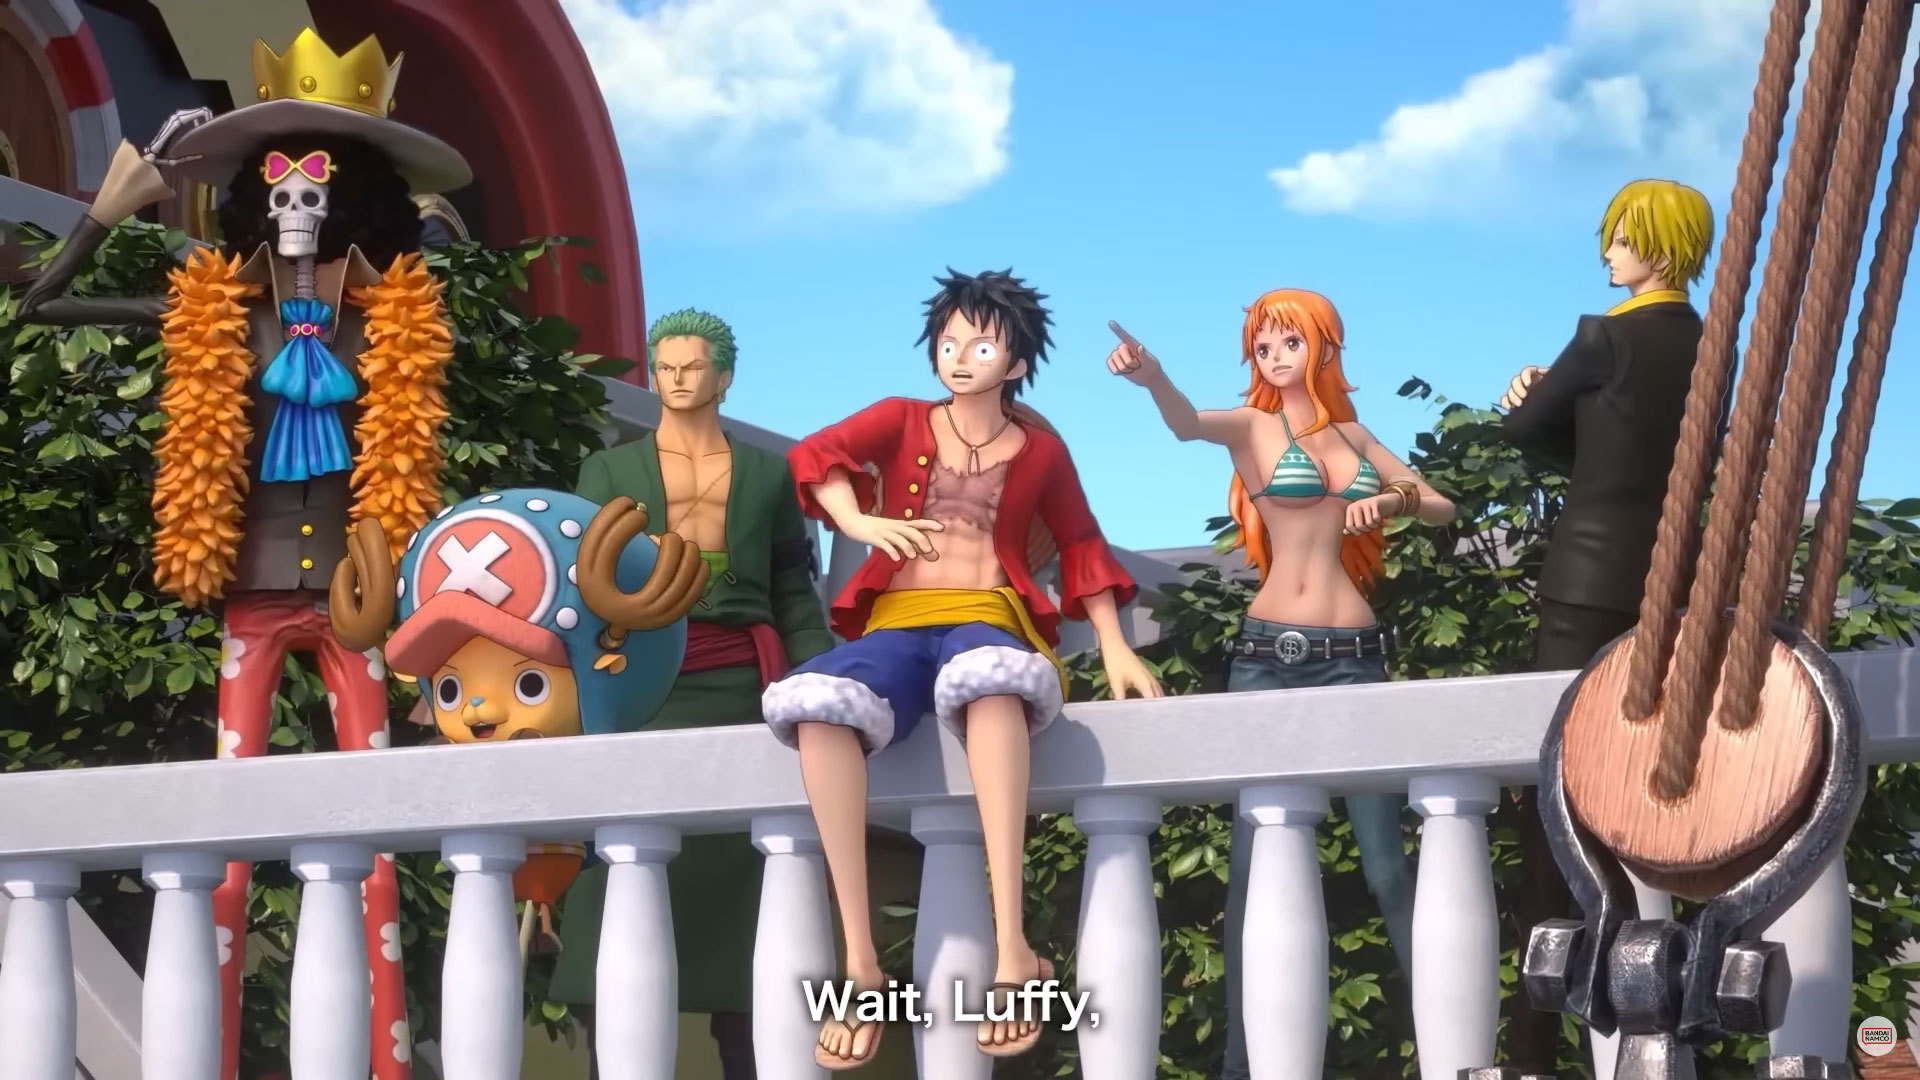 ONE PIECE ODYSSEY, Bandai Namco Entertainment America, Release Date, Trailer, NoobFeed, Monkey D. Luffy, Straw Hat Crew